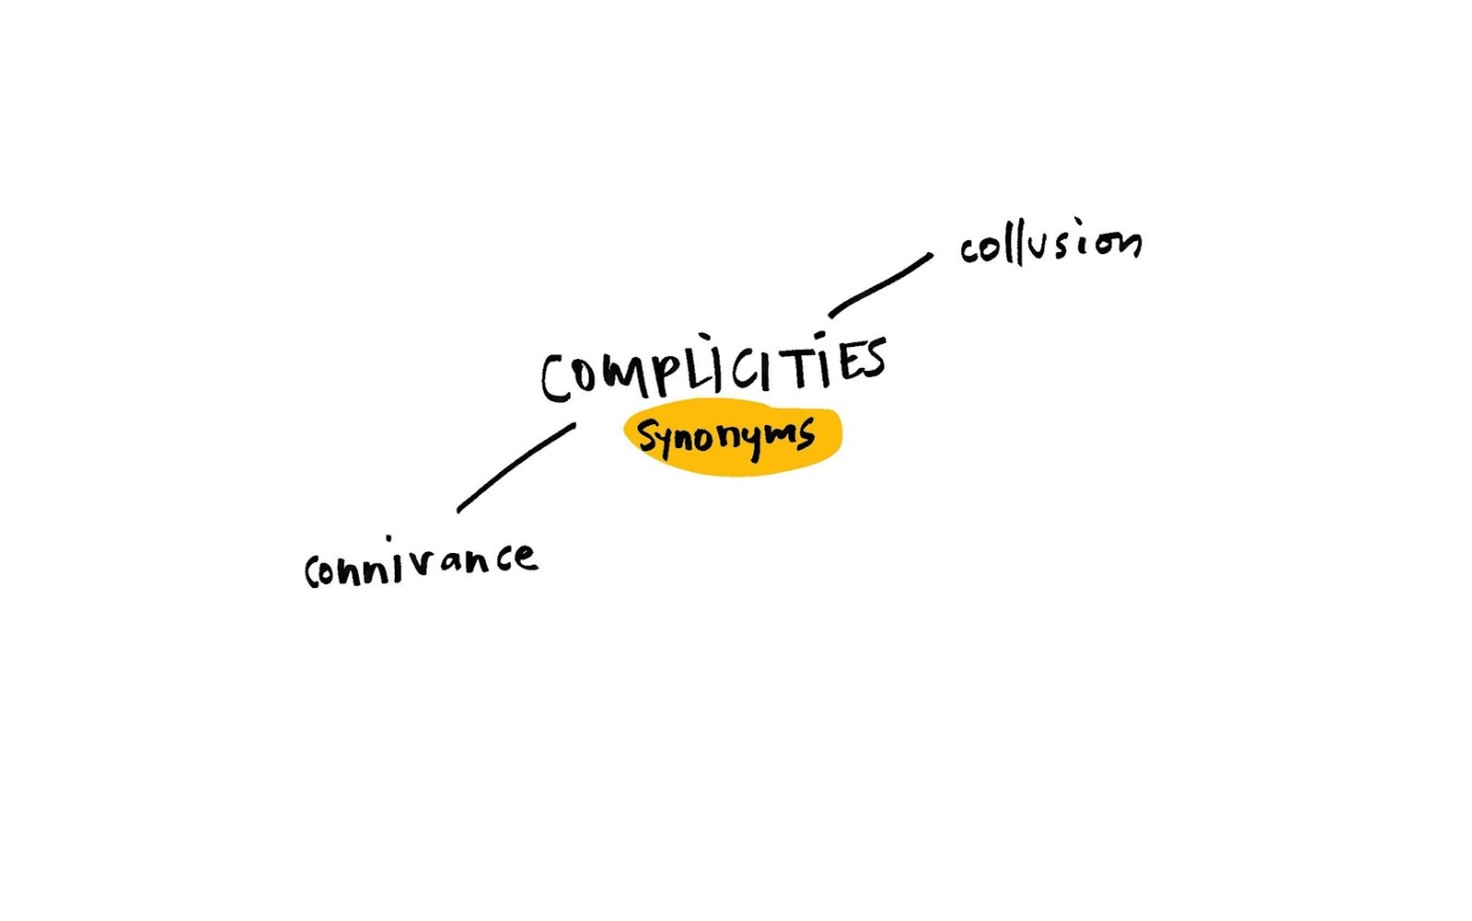 A mind map that has the words 'complicities, synonyms' in the center. Two lines leave from the center to opposite directions. Both lines have one word in the end: collusion and connivance.